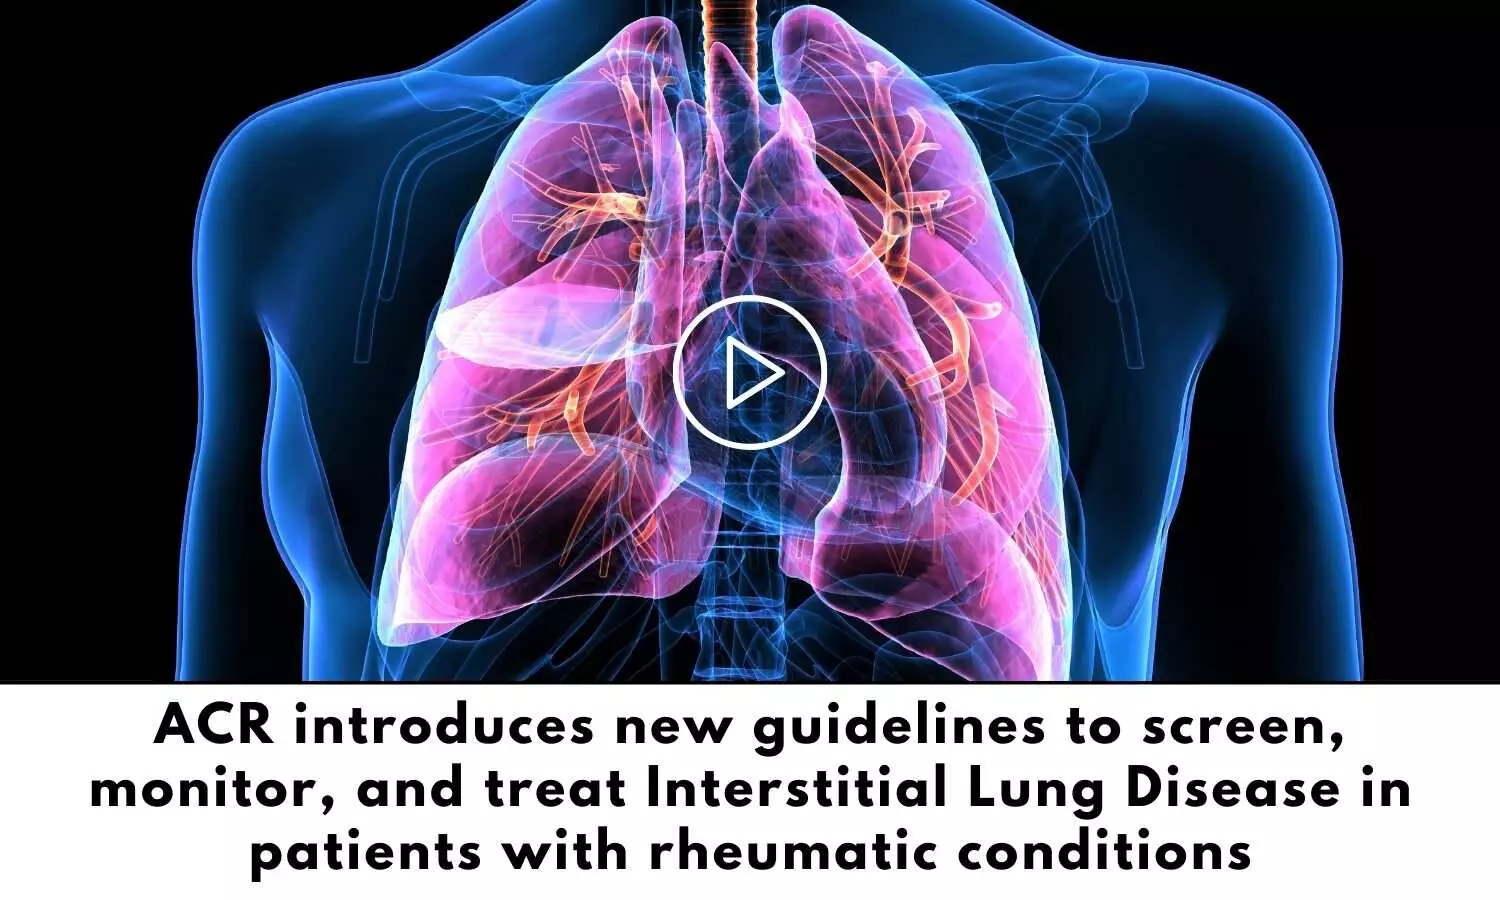 ACR New Guidelines for Interstitial Lung Disease management